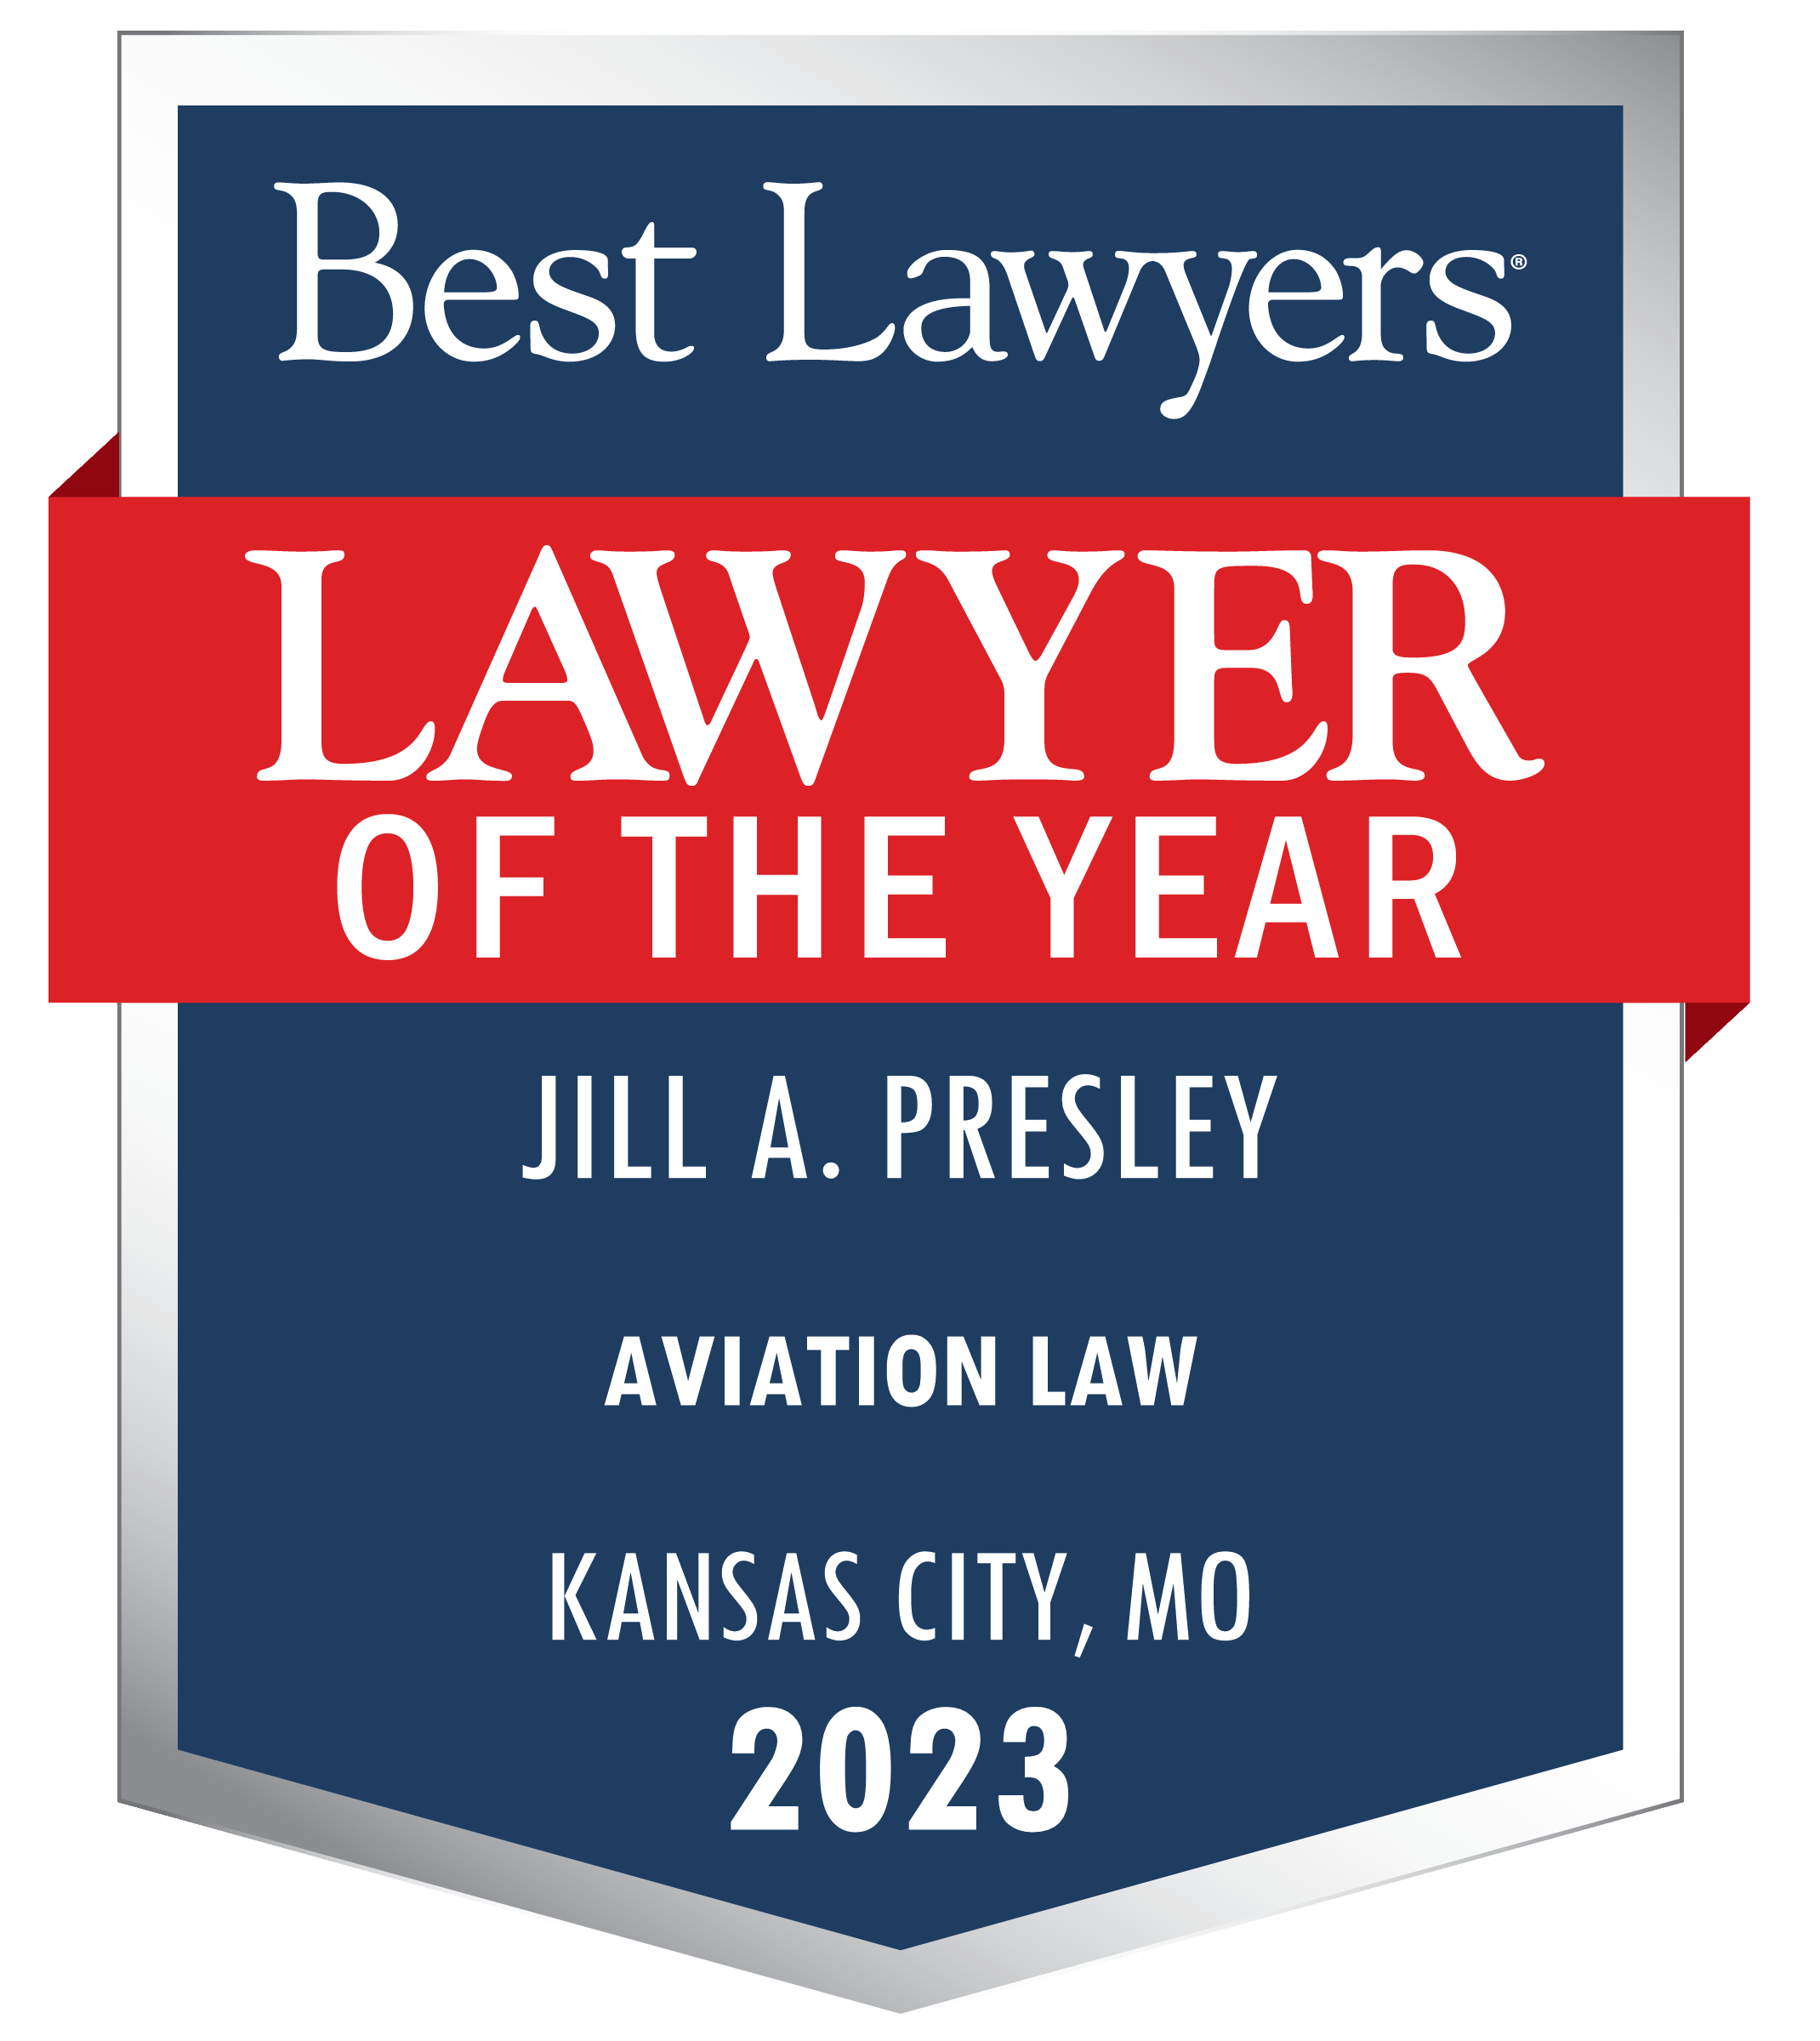 2023 best lawyers jill presley lawyer of the year badge